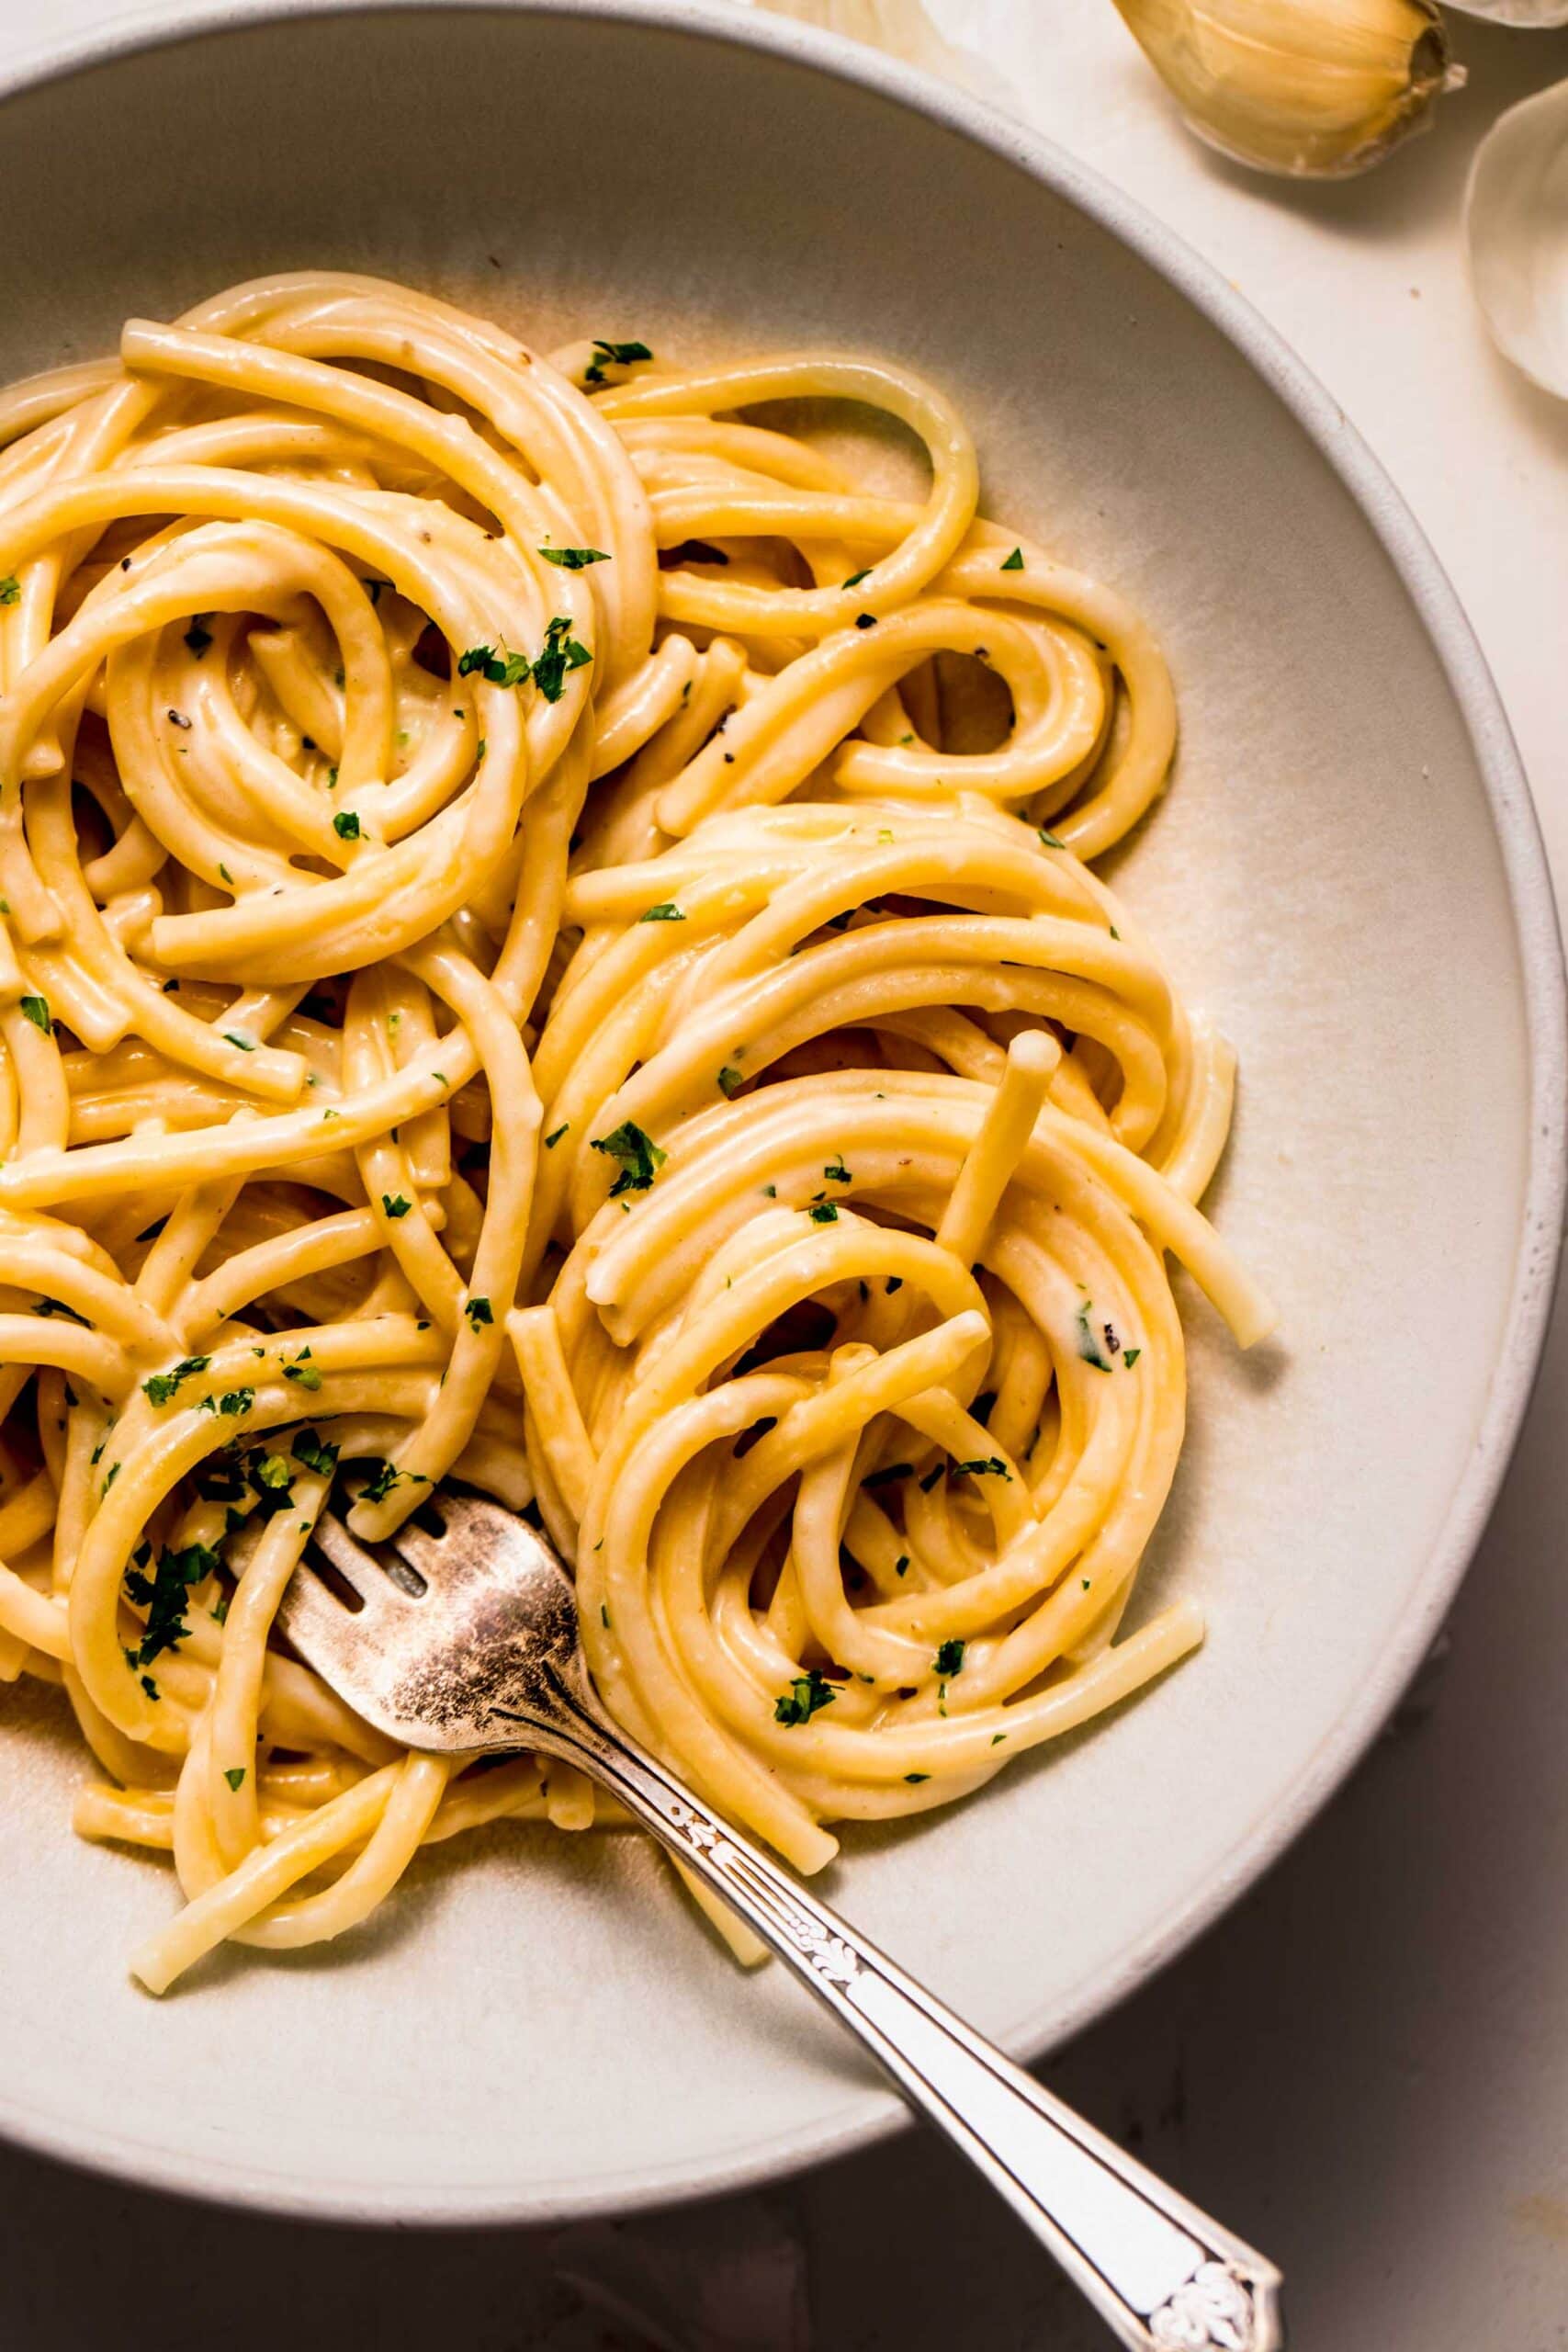 Pasta with creamy garlic sauce in bowl.